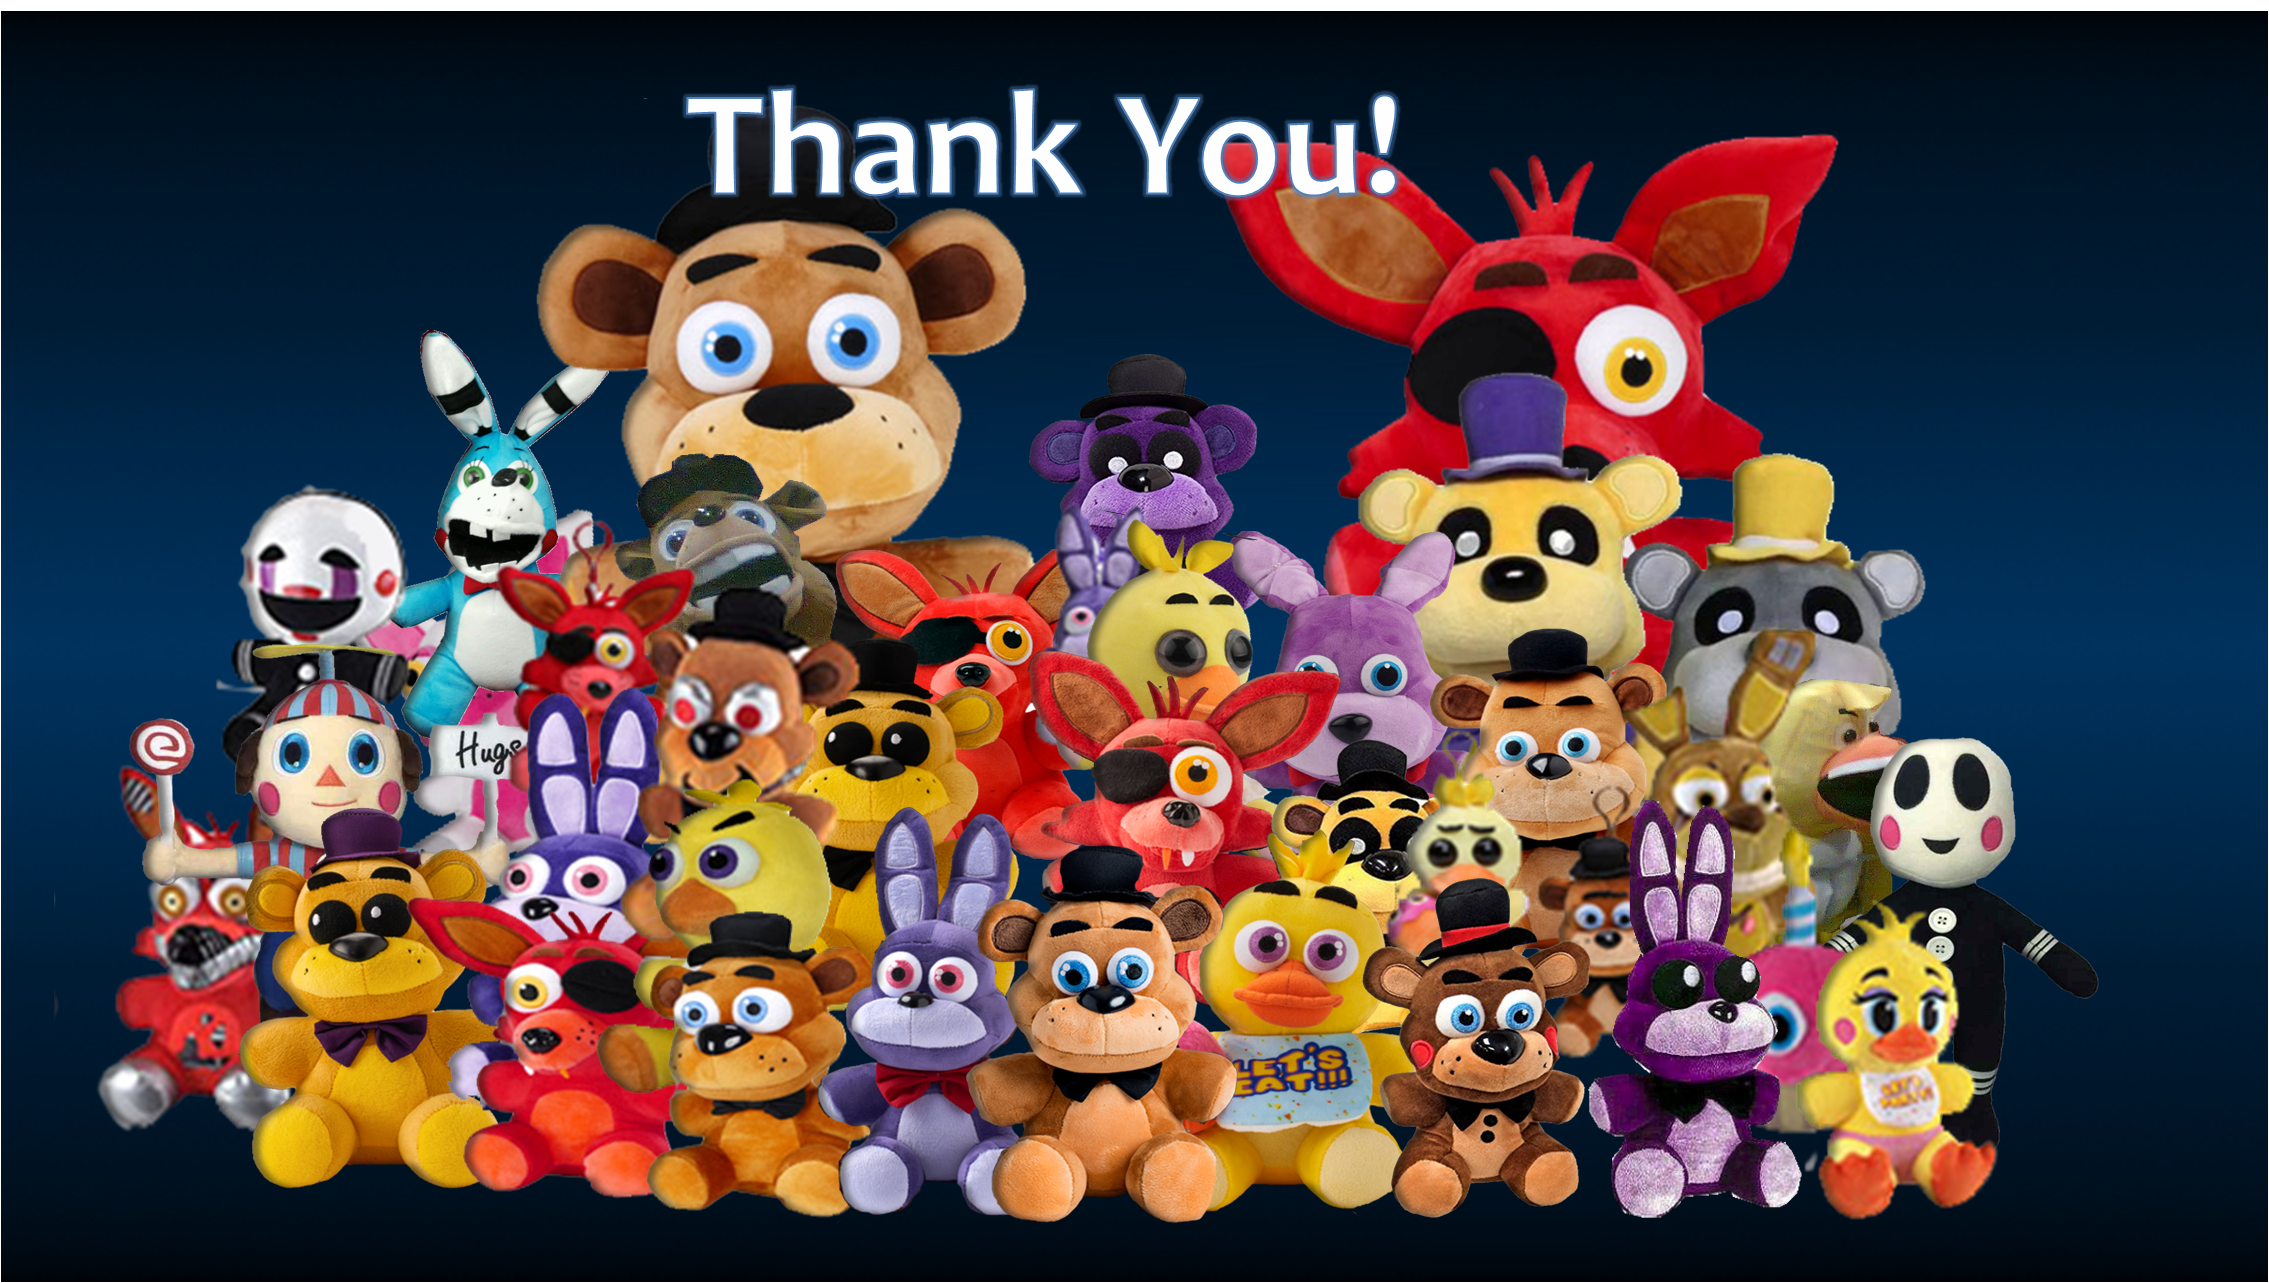 So, I did this a long time ago. A Thank You wallpaper except with plushies